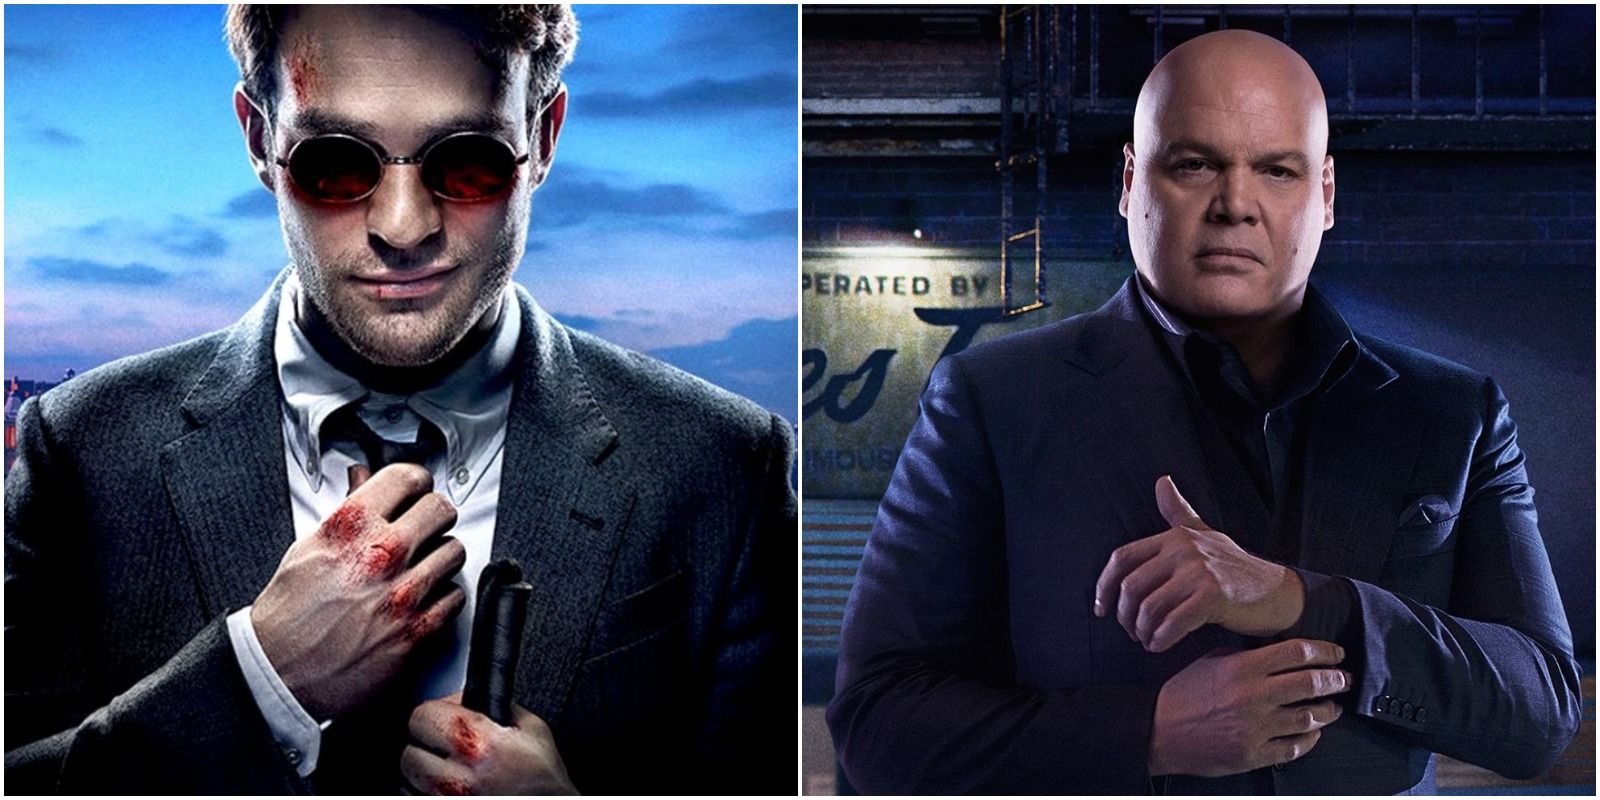 Charlie Cox and Vincent D'Onofrio as Matt Murdock/Daredevil and Wilson Fisk/Kingpin